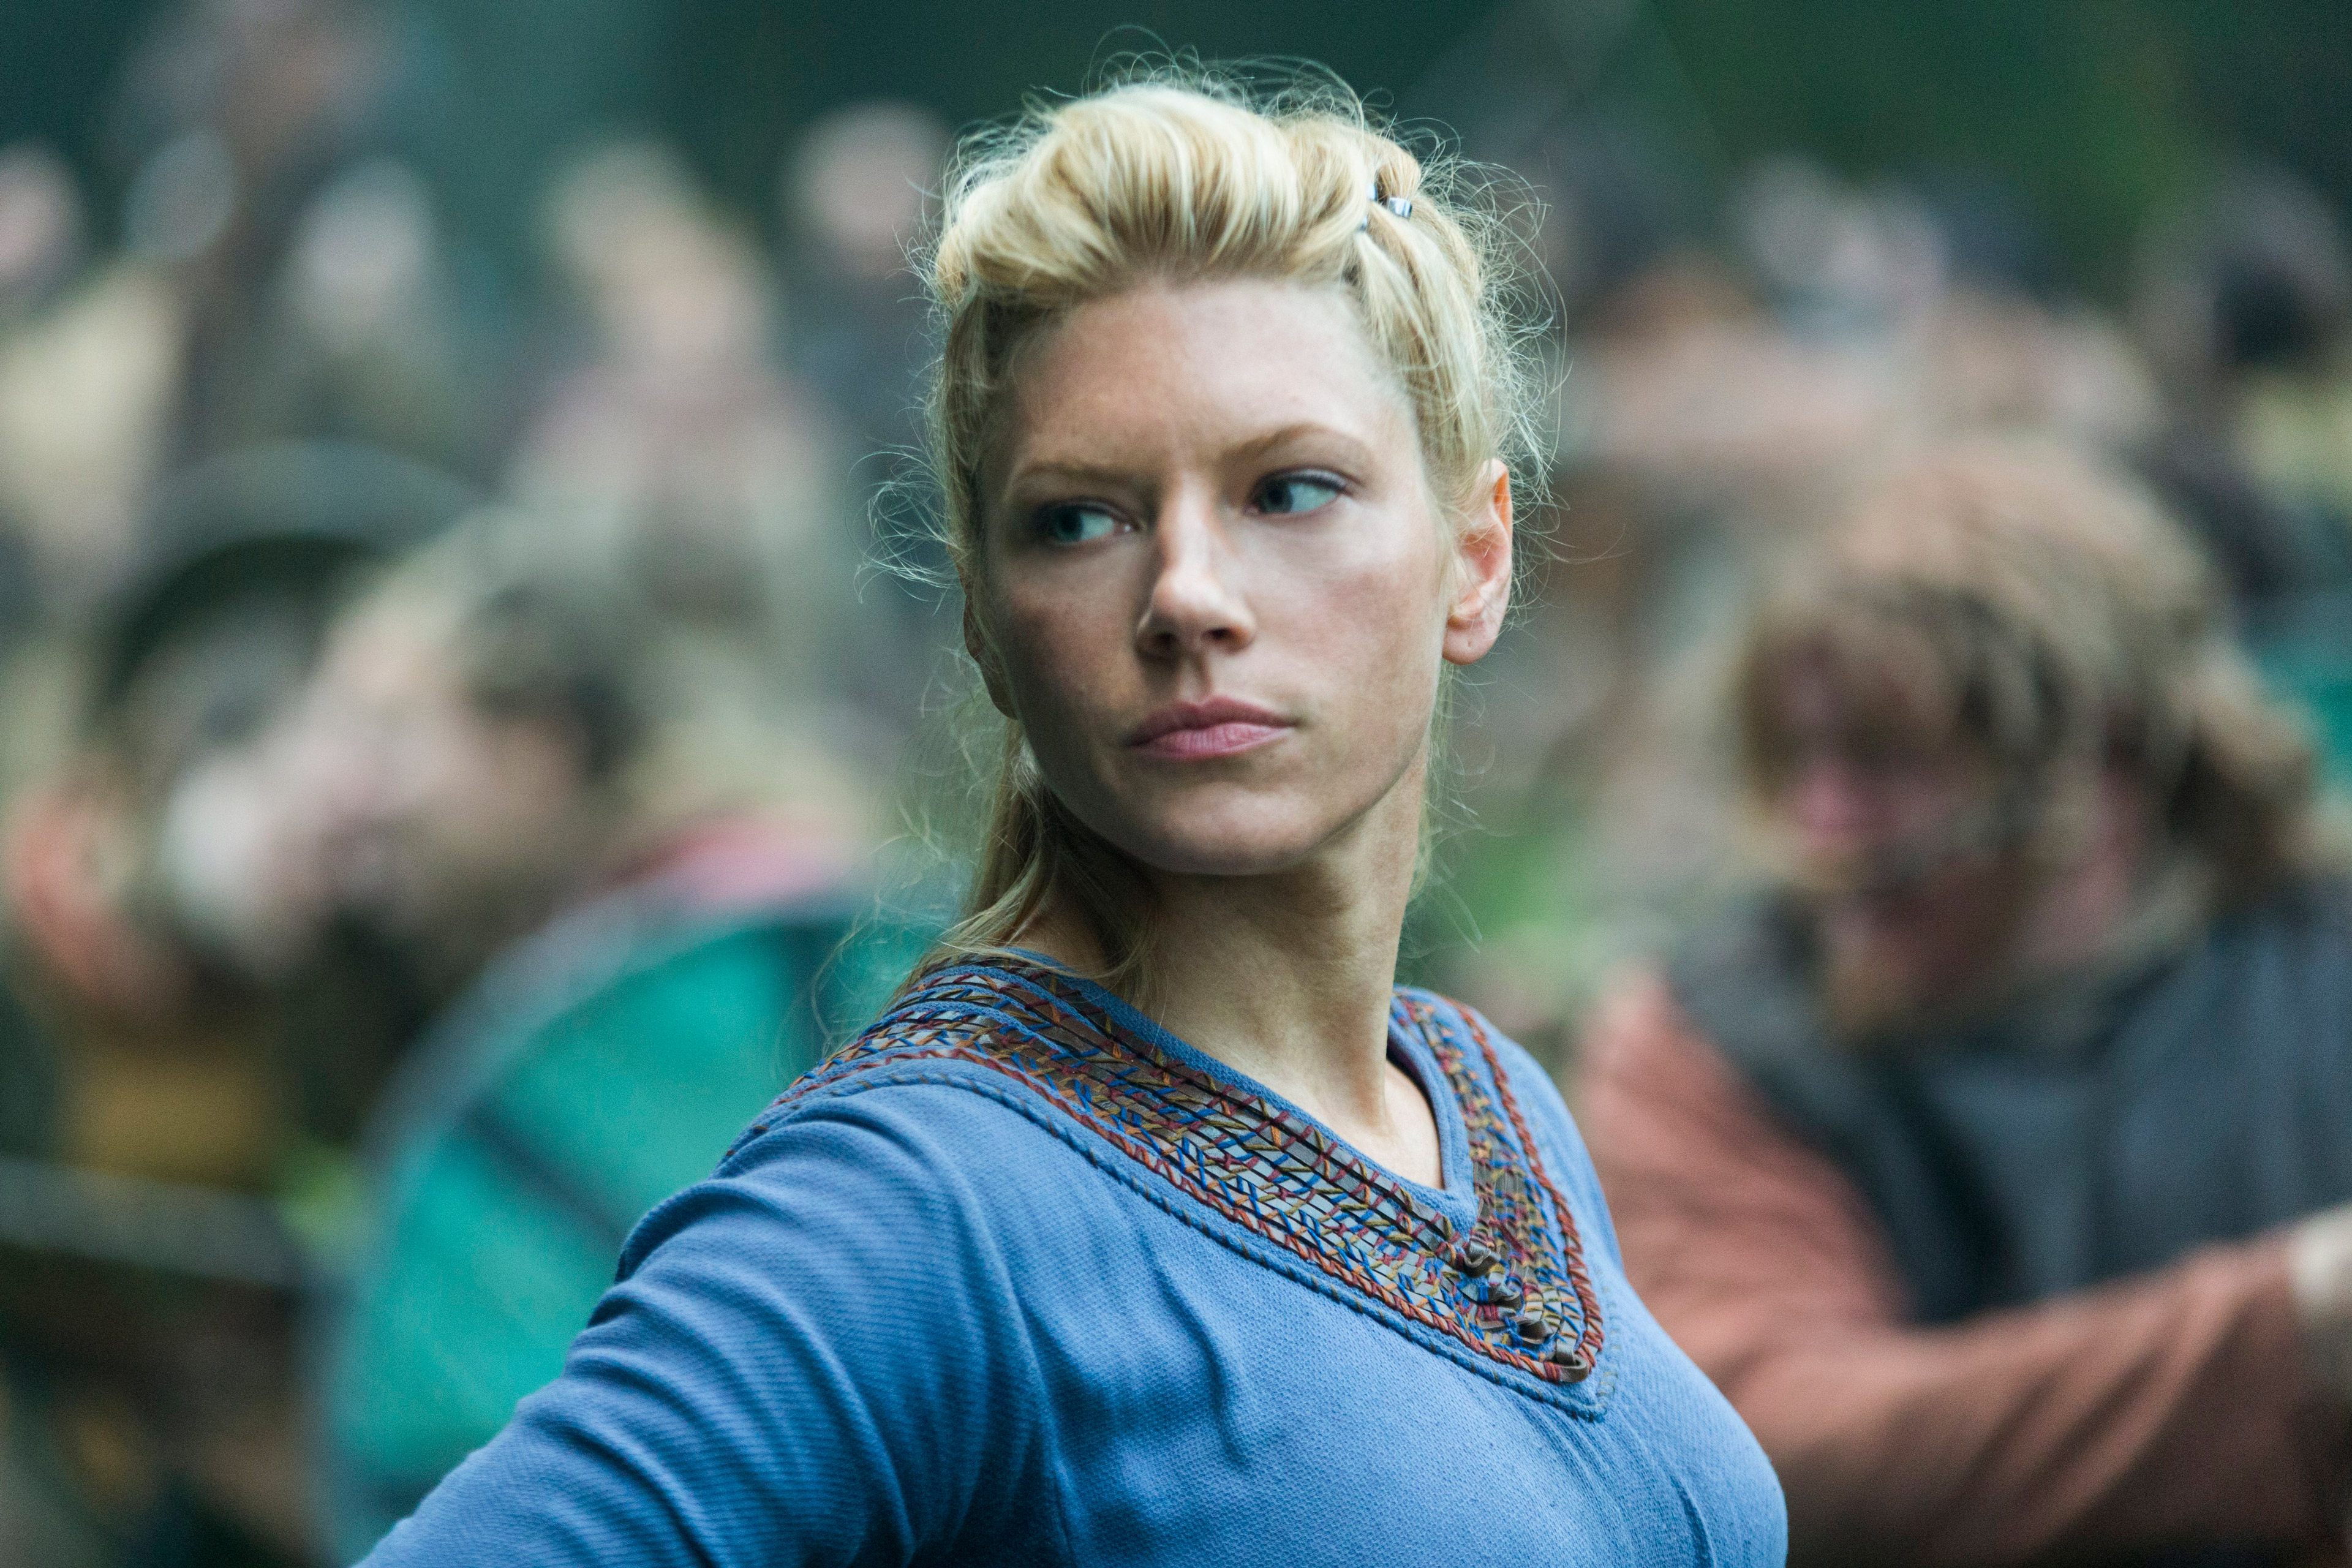 Lagertha In Vikings, HD Tv Shows, 4k Wallpaper, Image, Background, Photo and Picture